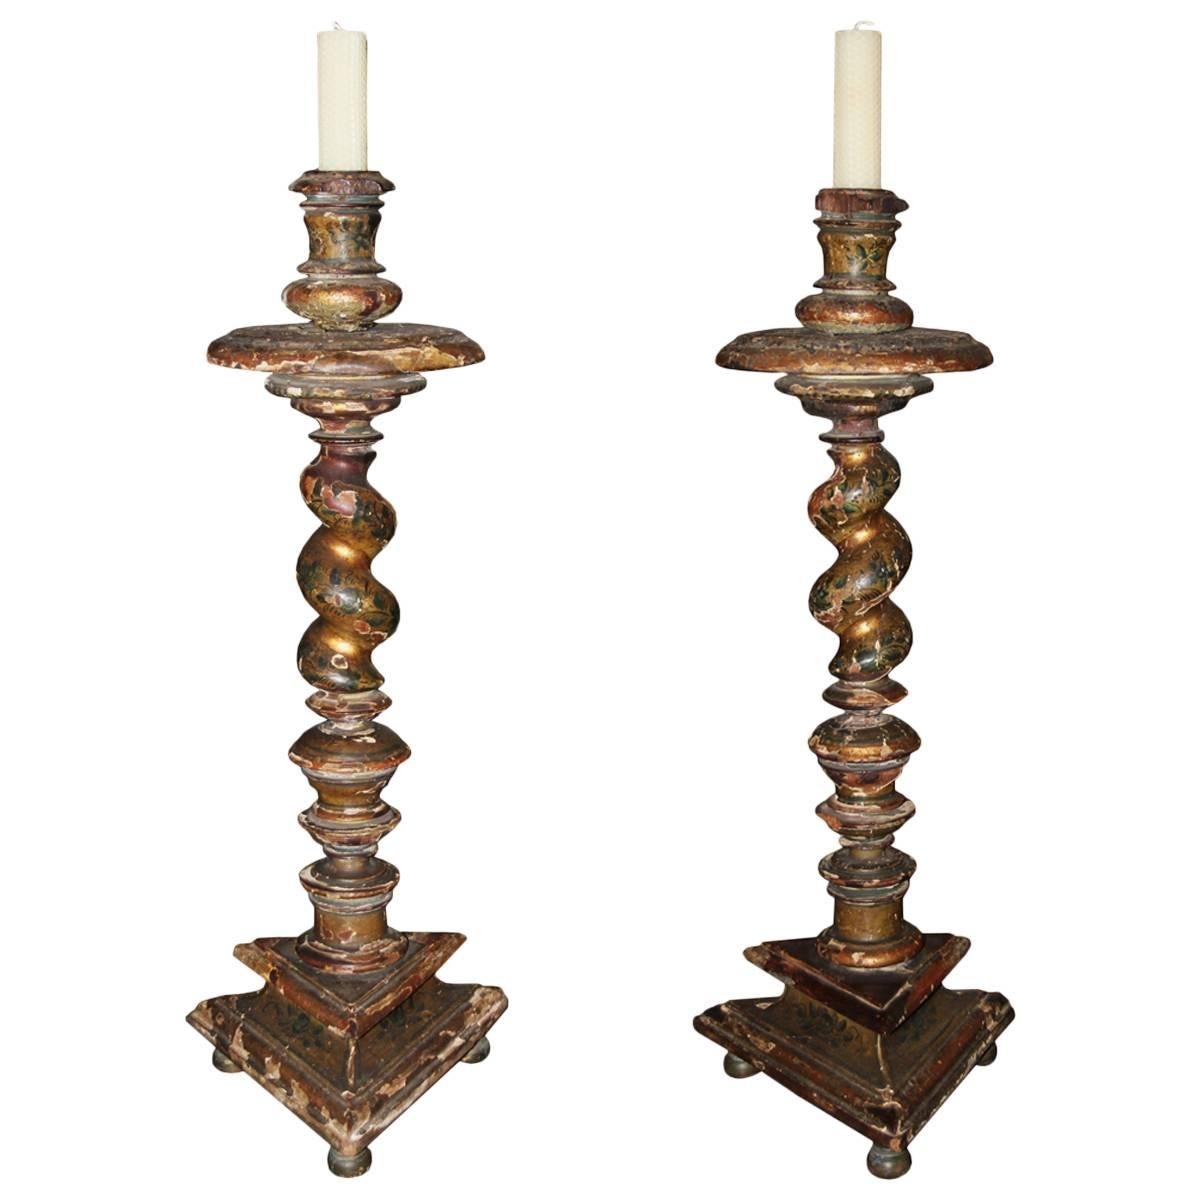 Pair of 17th Century Italian Polychrome and Parcel-Gilt Barley Candlesticks For Sale